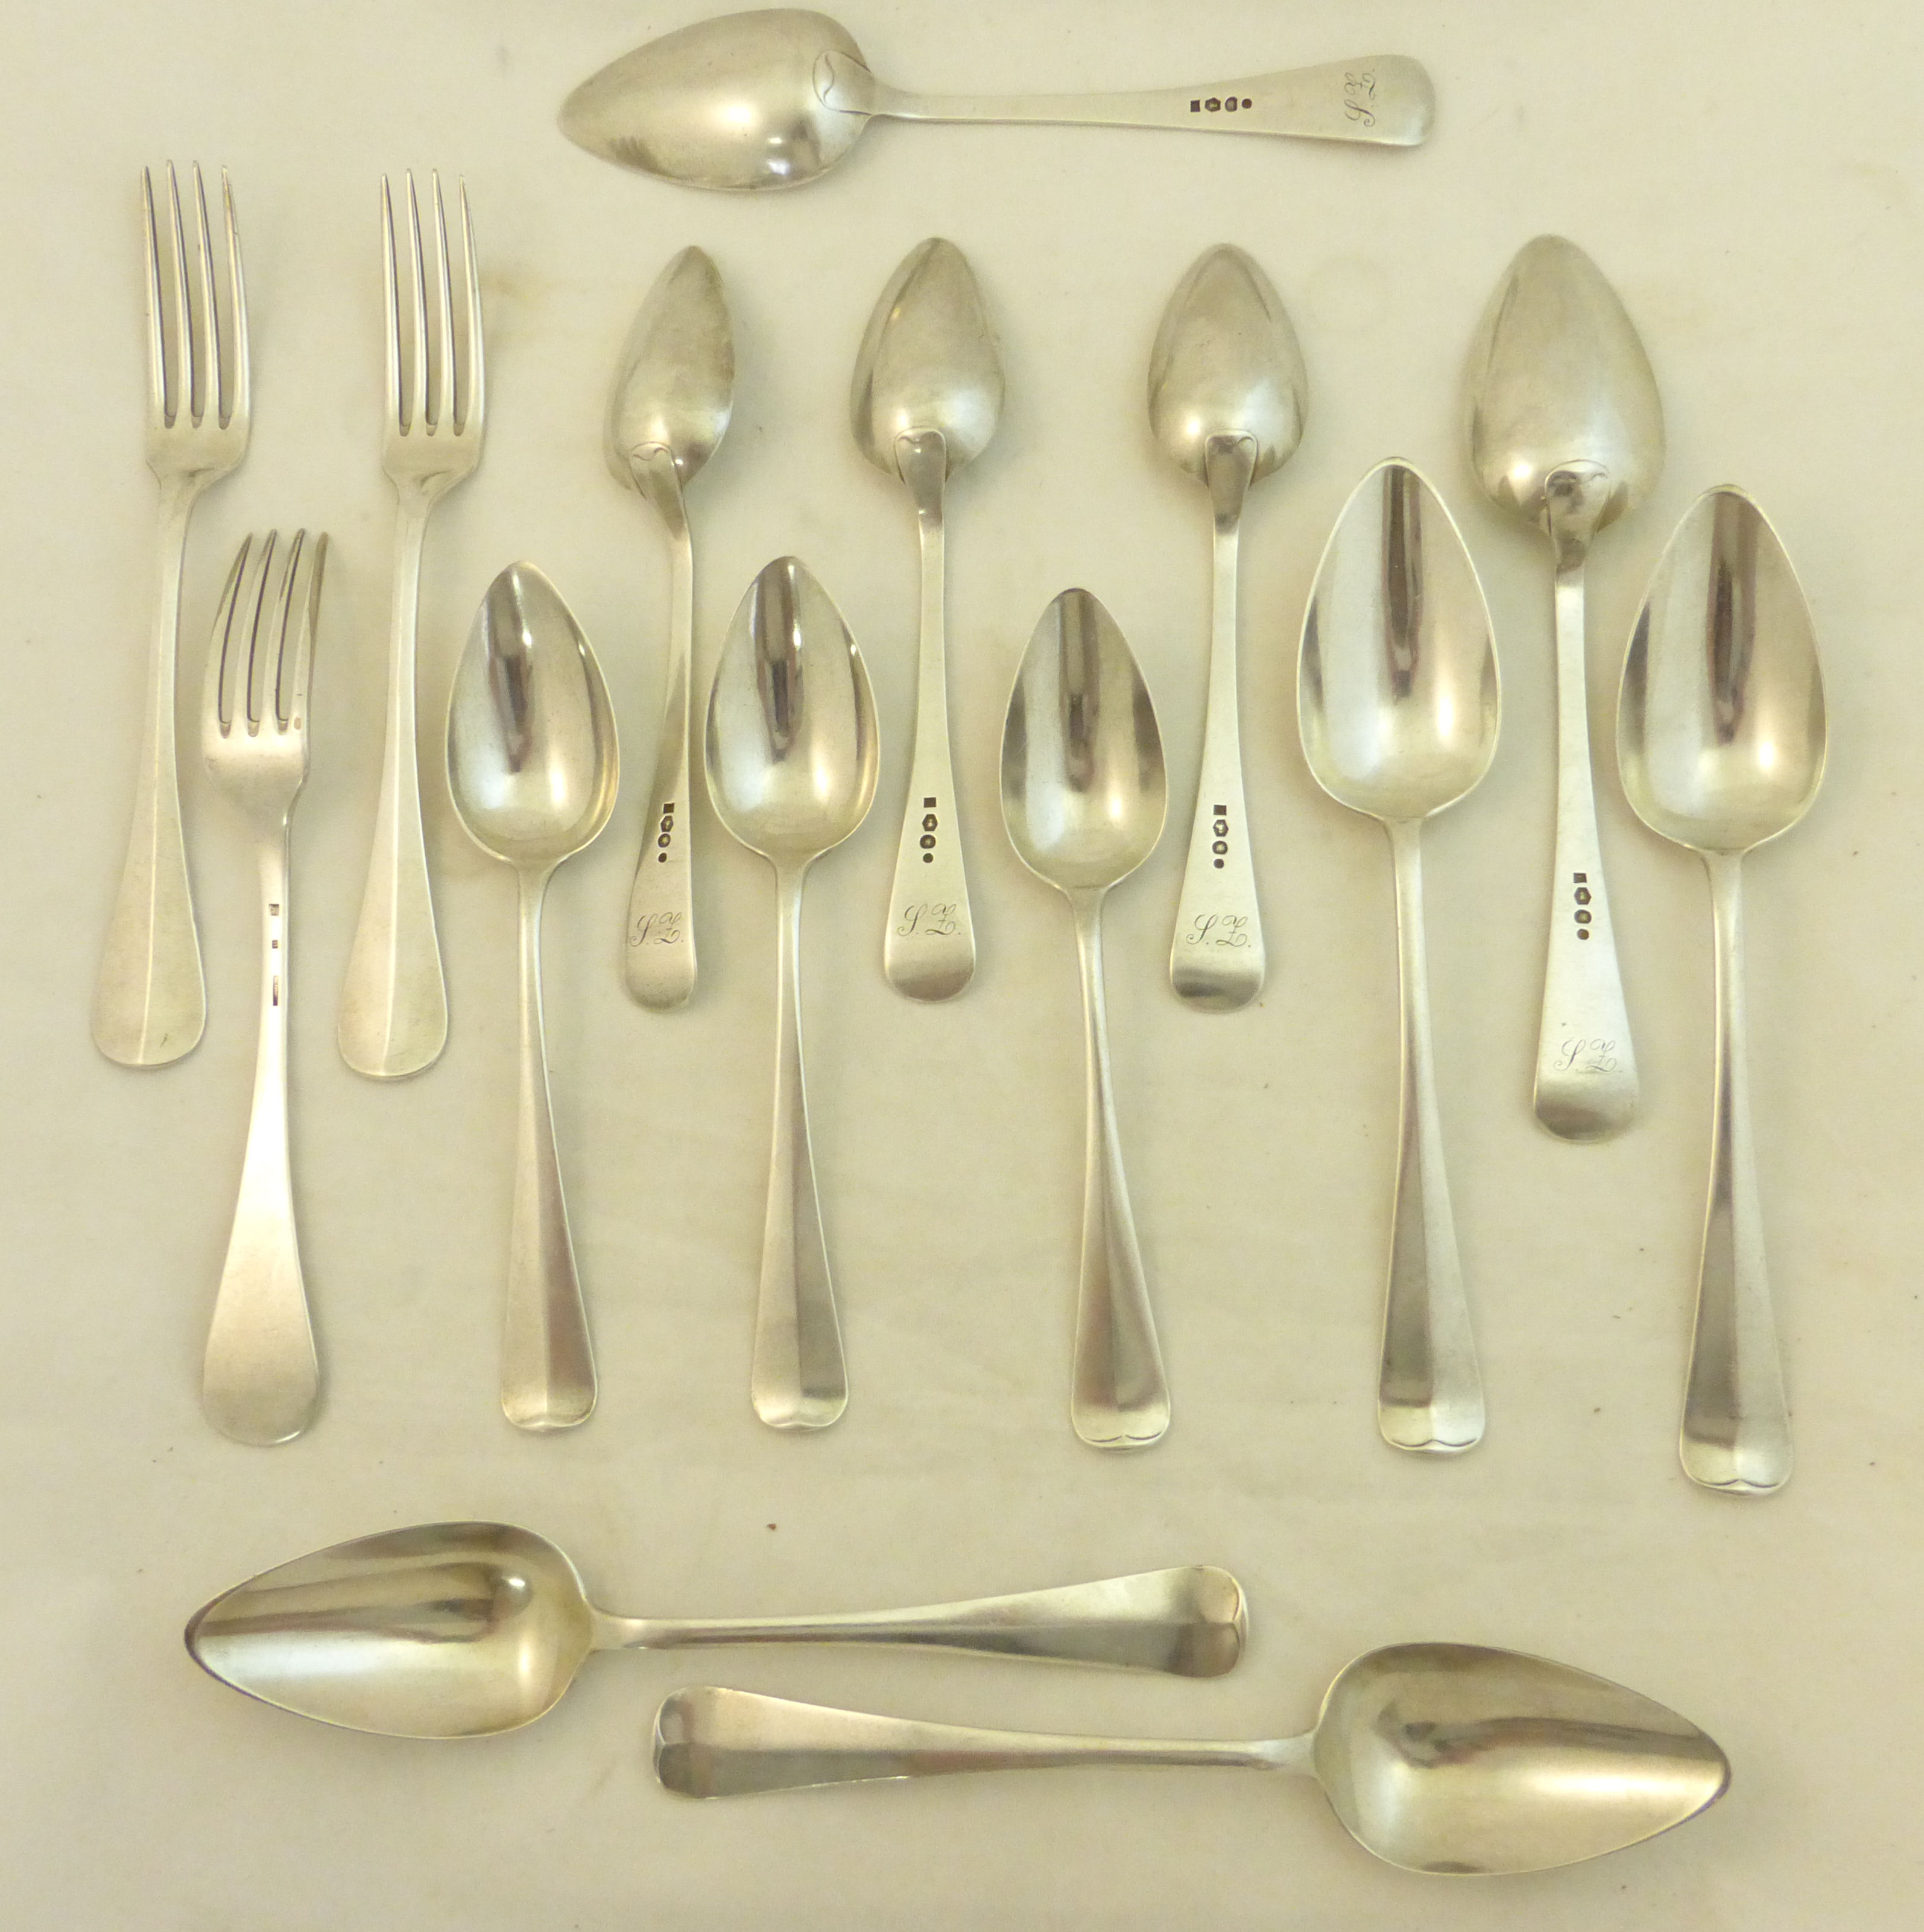 A suite of Dutch silver Flatware comprising six table spoons and six dessert spoons, various dates